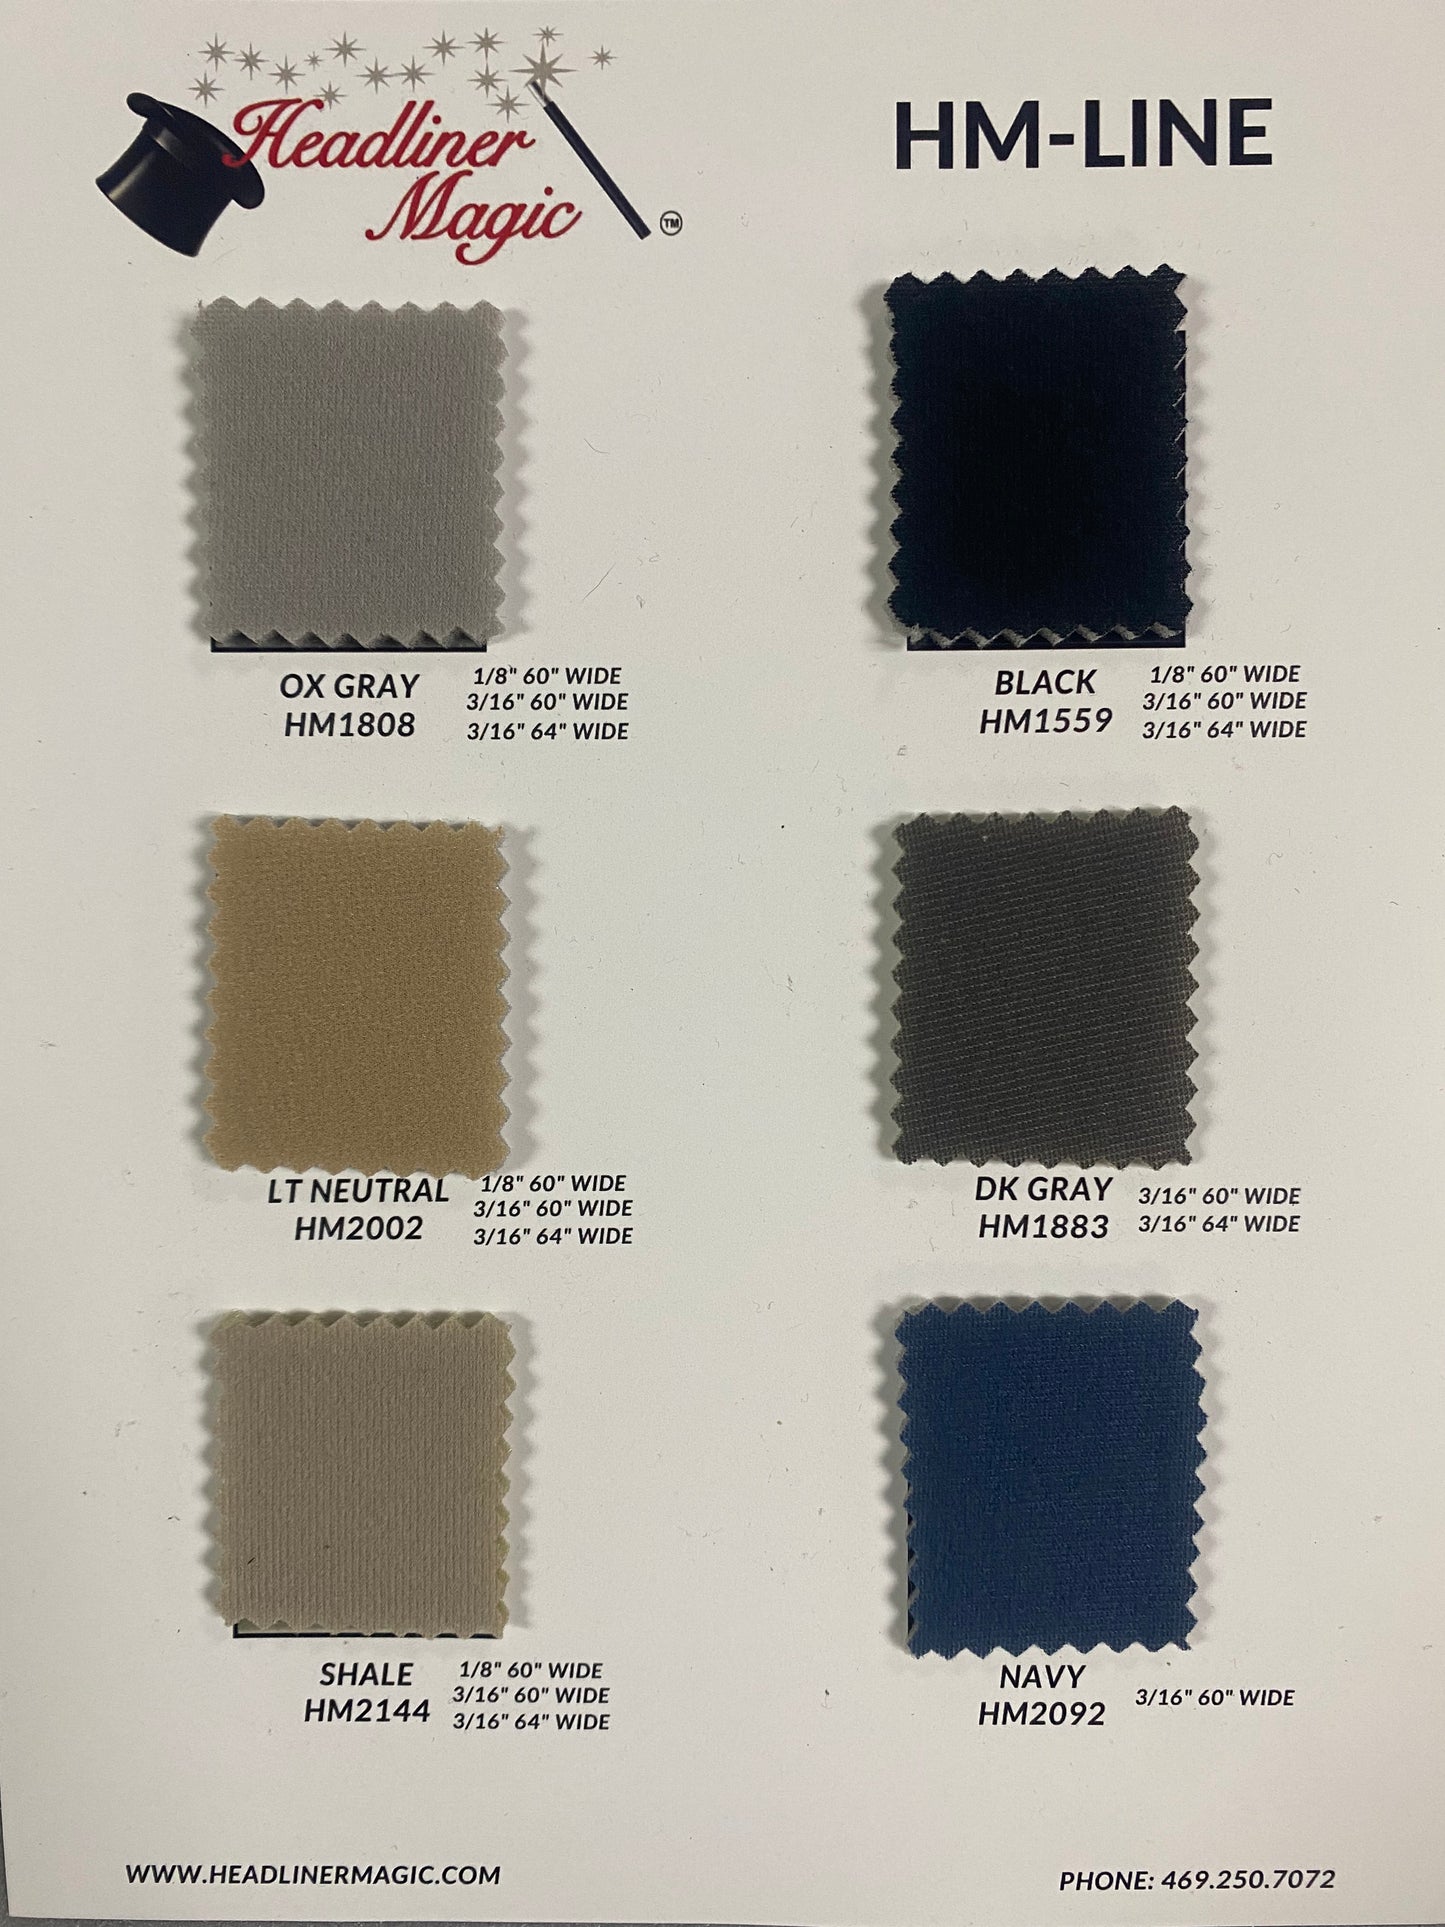 HM-LINE SAMPLE SWATCH CHART COLOR CARDS